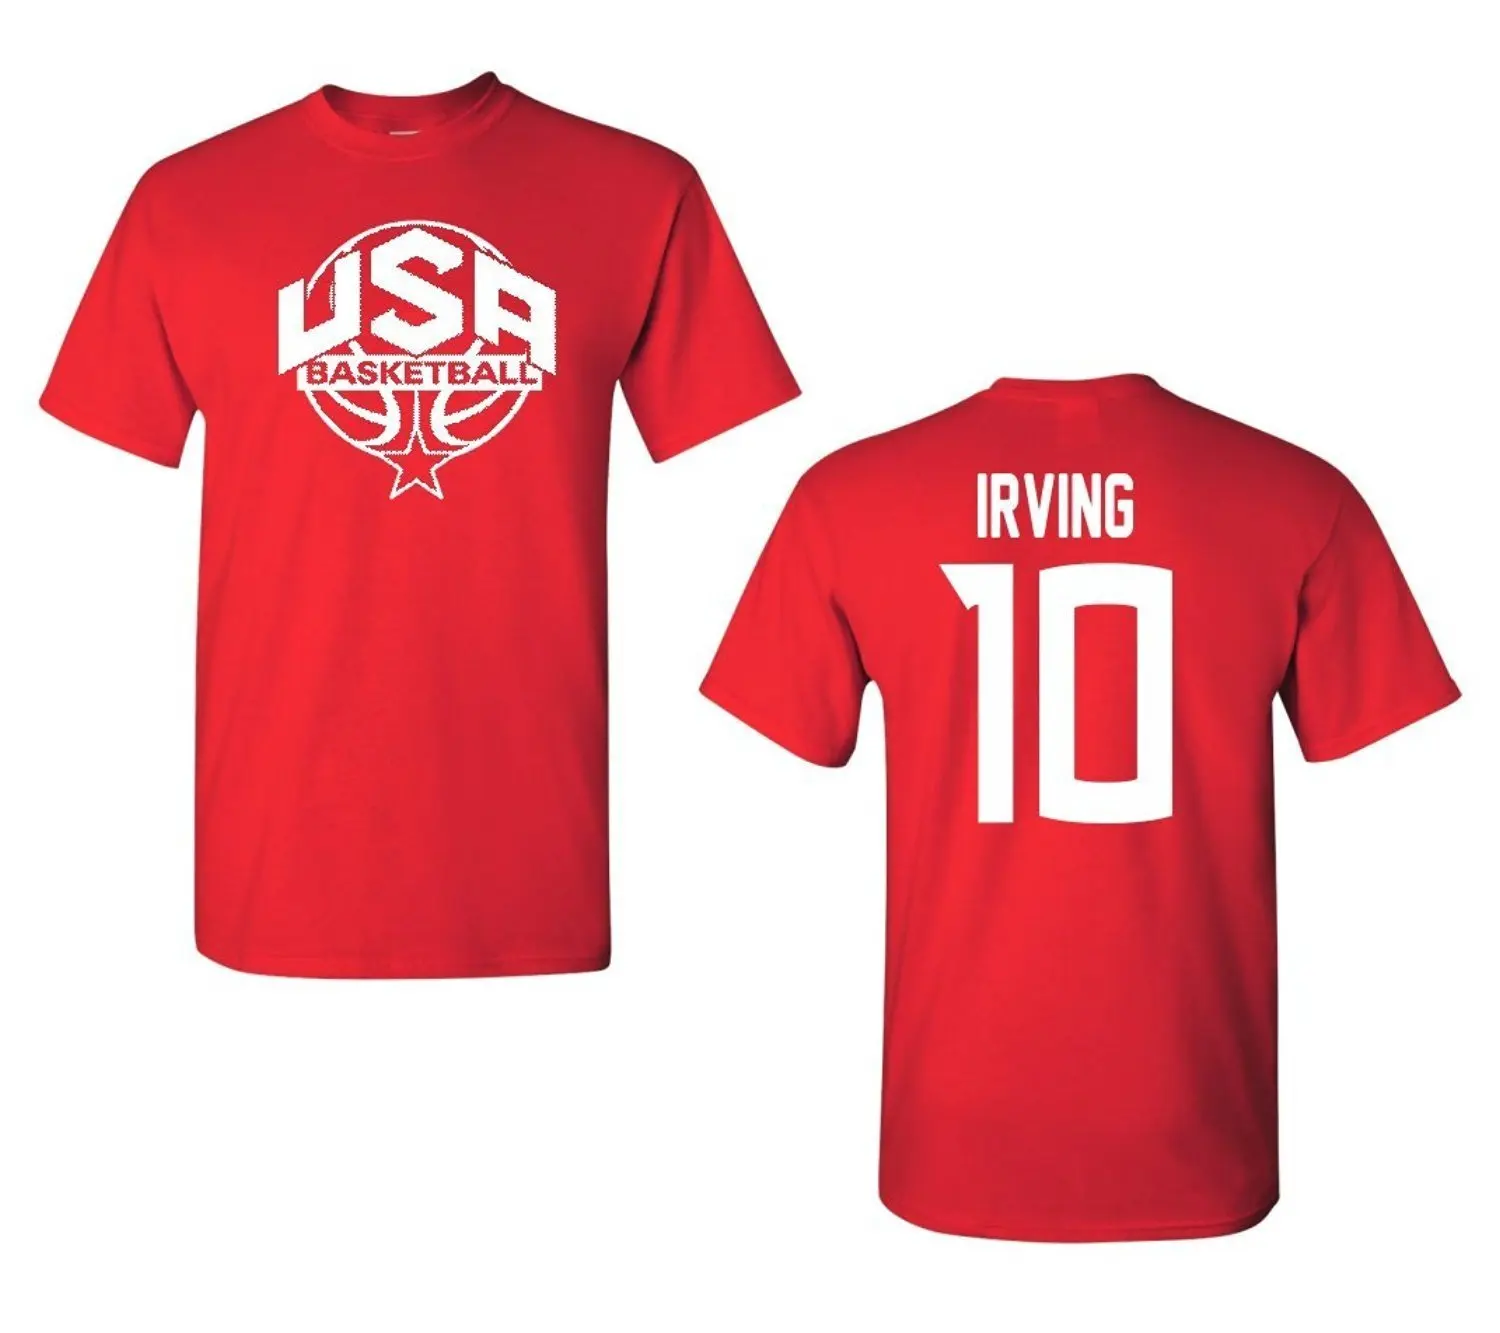 kyrie irving t shirt youth